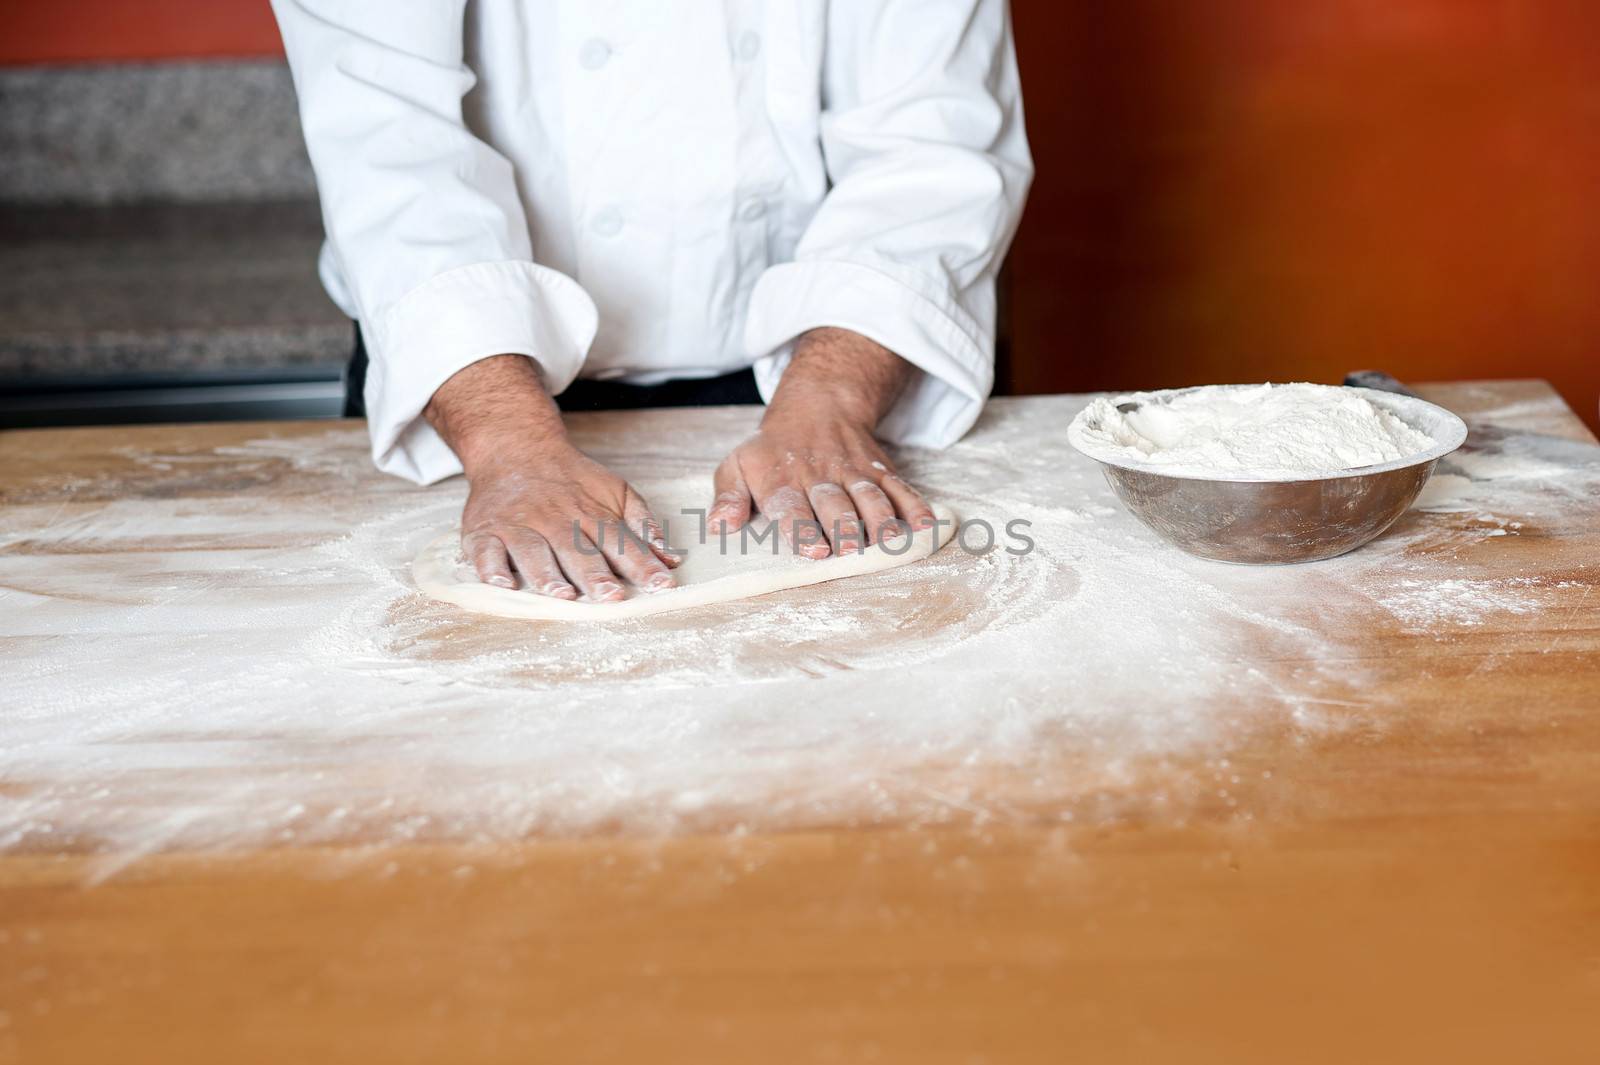 Baker kneading a dough by stockyimages